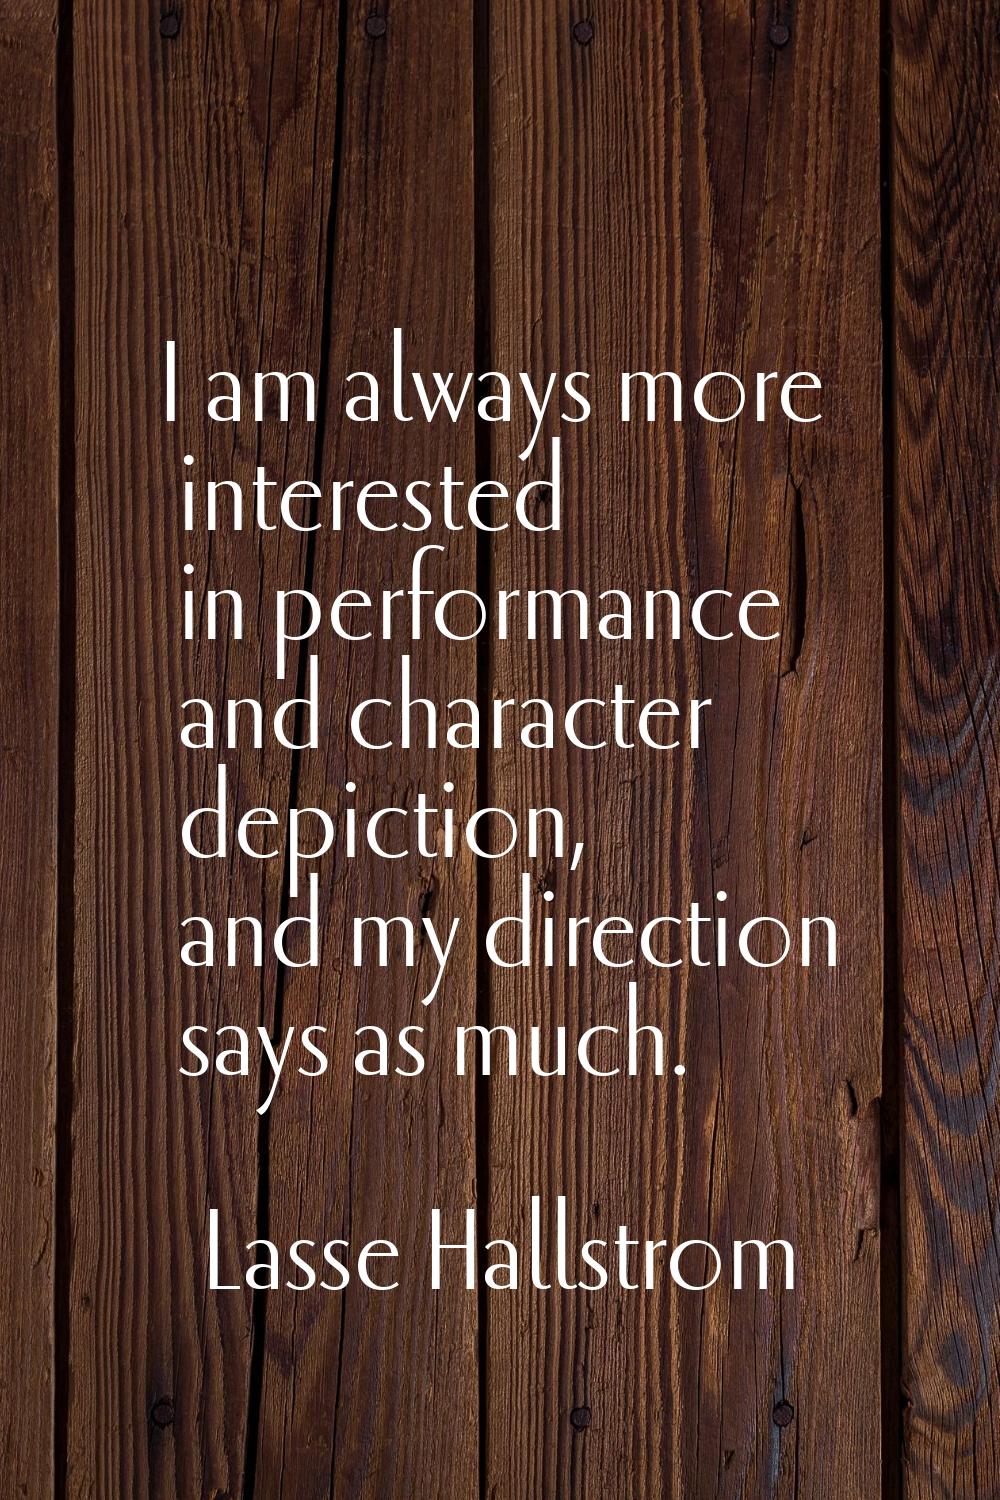 I am always more interested in performance and character depiction, and my direction says as much.